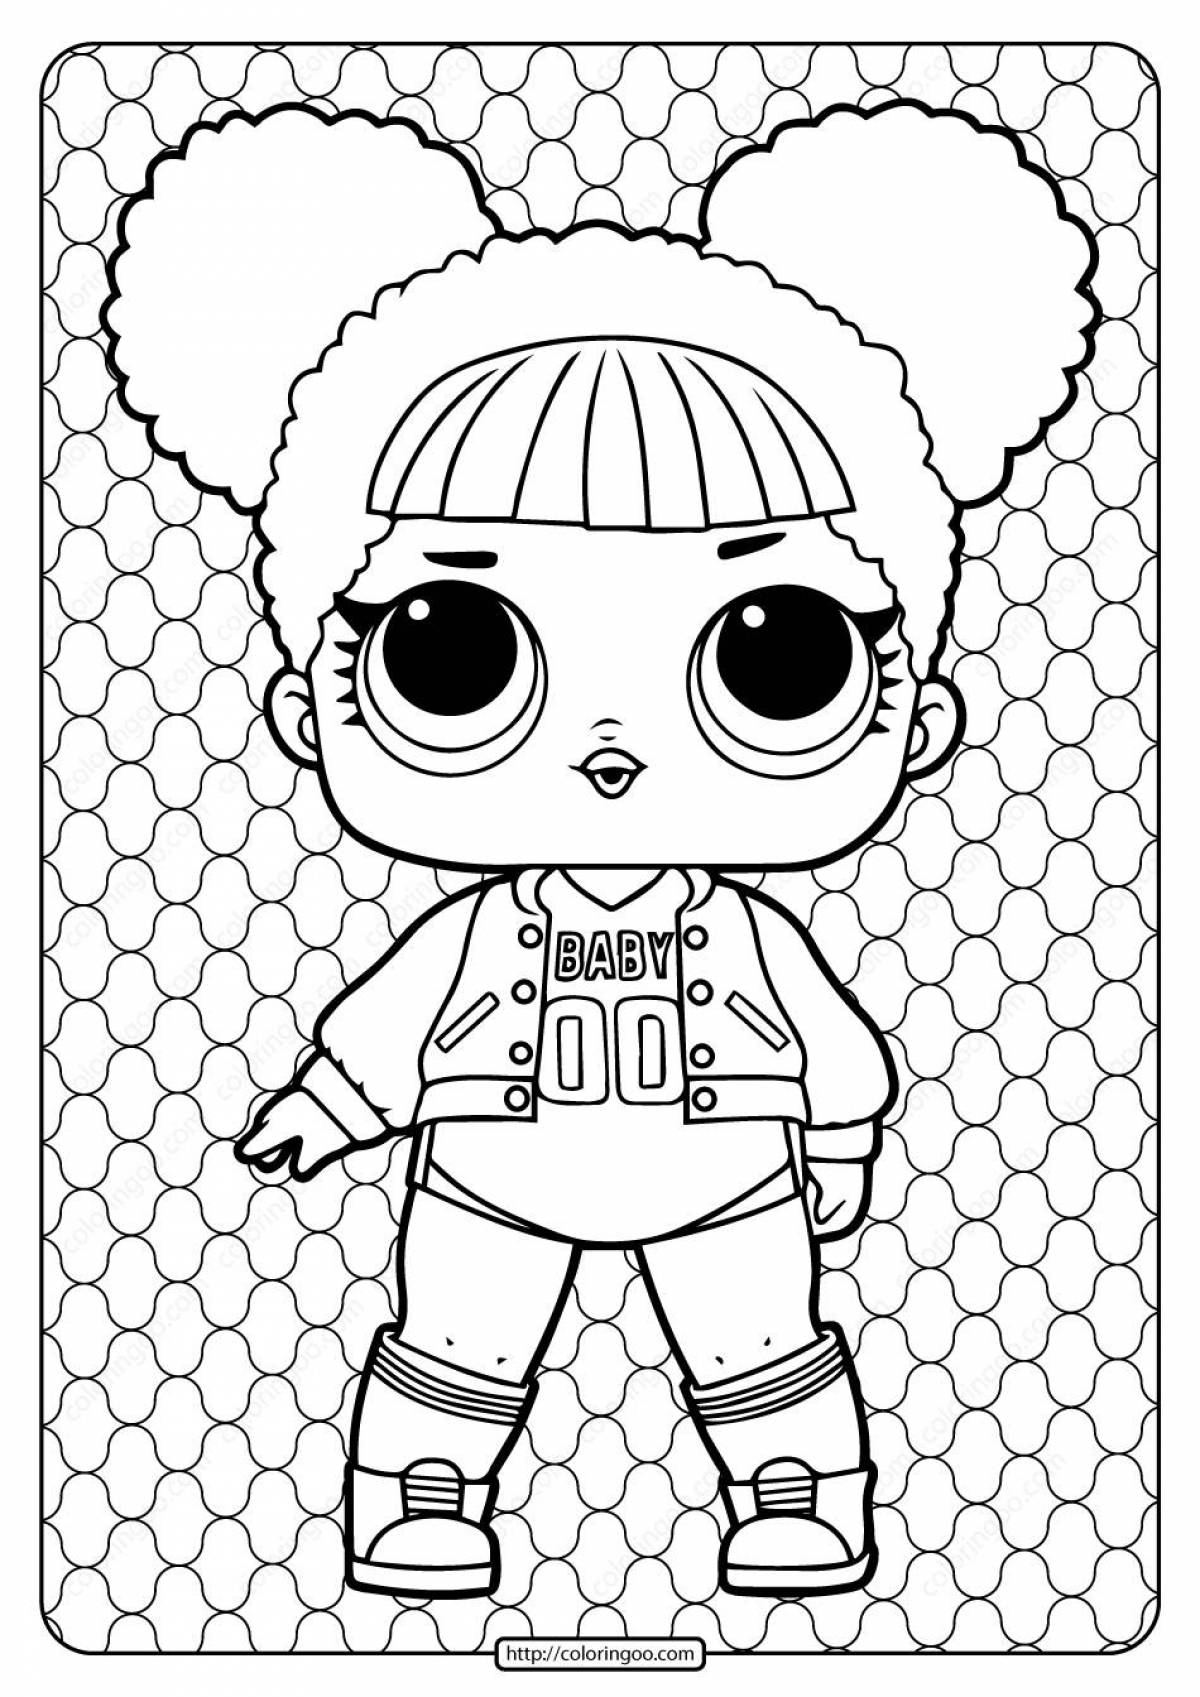 Coloring lol doll for kids